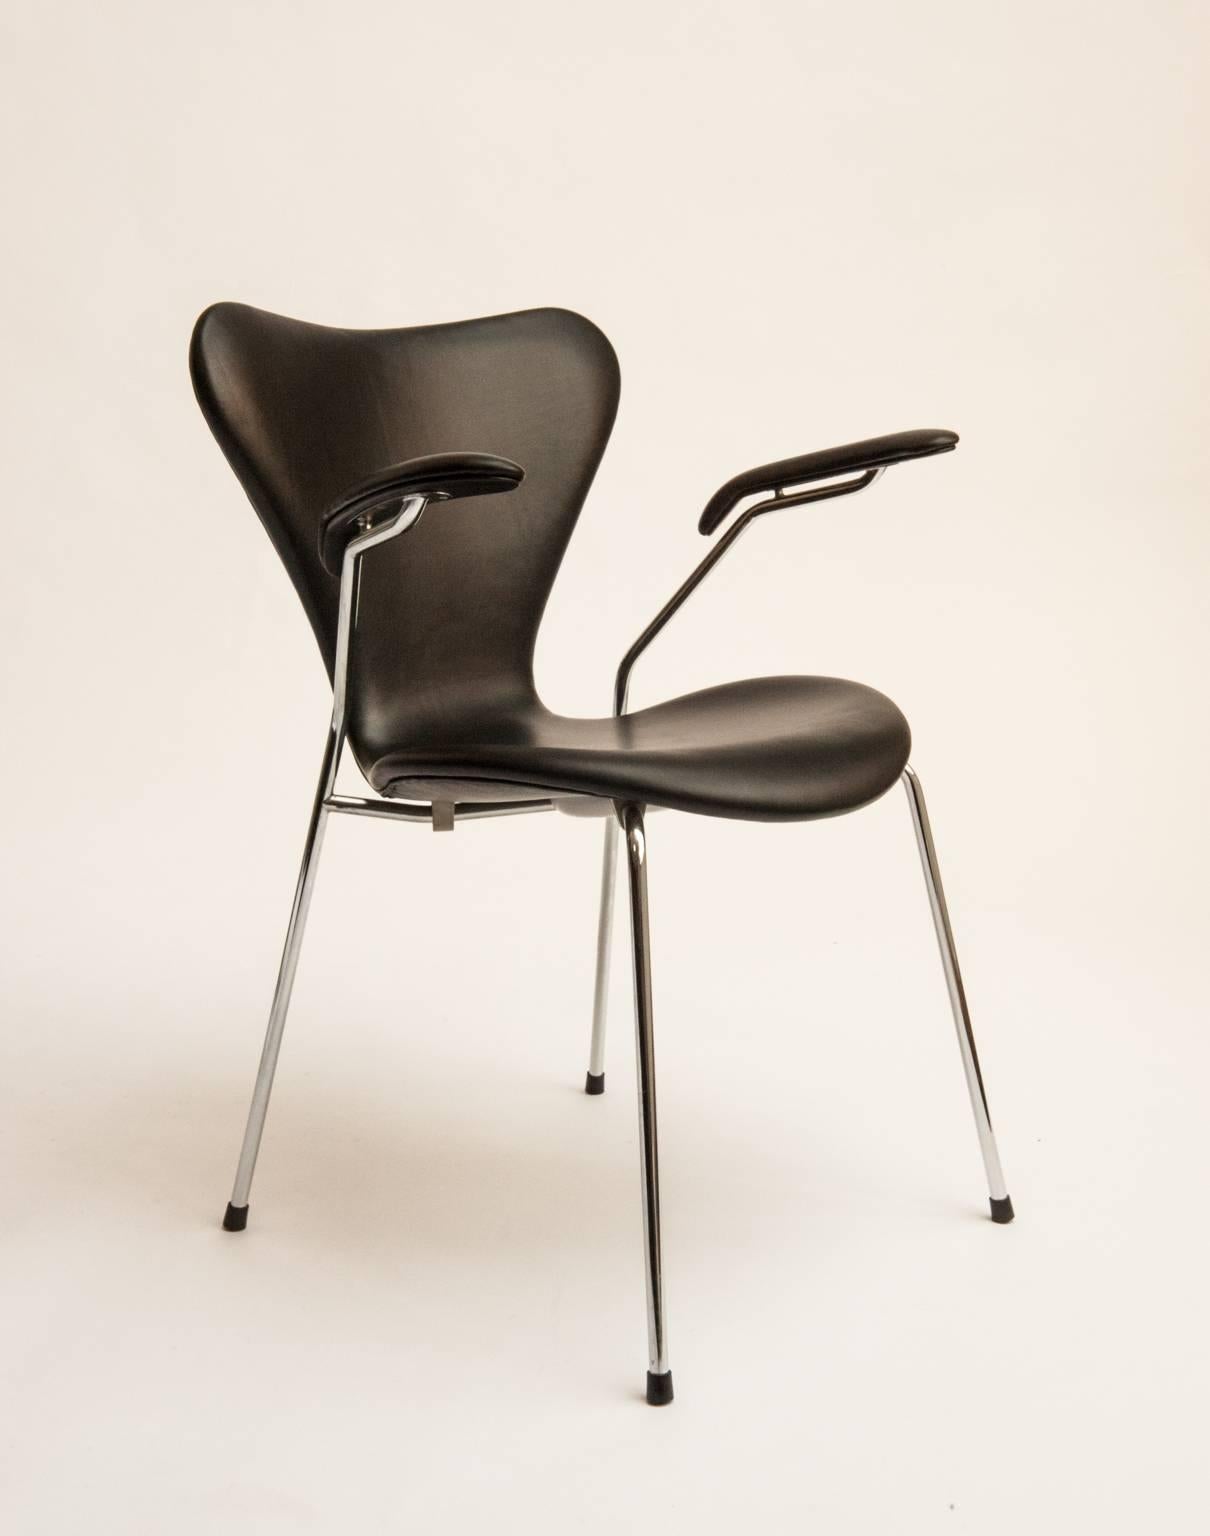 Seven chair, model 3207. Set of six armchairs in moulded plywood shell, with chromed tubular steel frame. Designed in 1955. Manufactured by Fritz Hansen. Professionally reupholstered with Black Elegance aniline leather.
Literature: Noritsugu Oda,